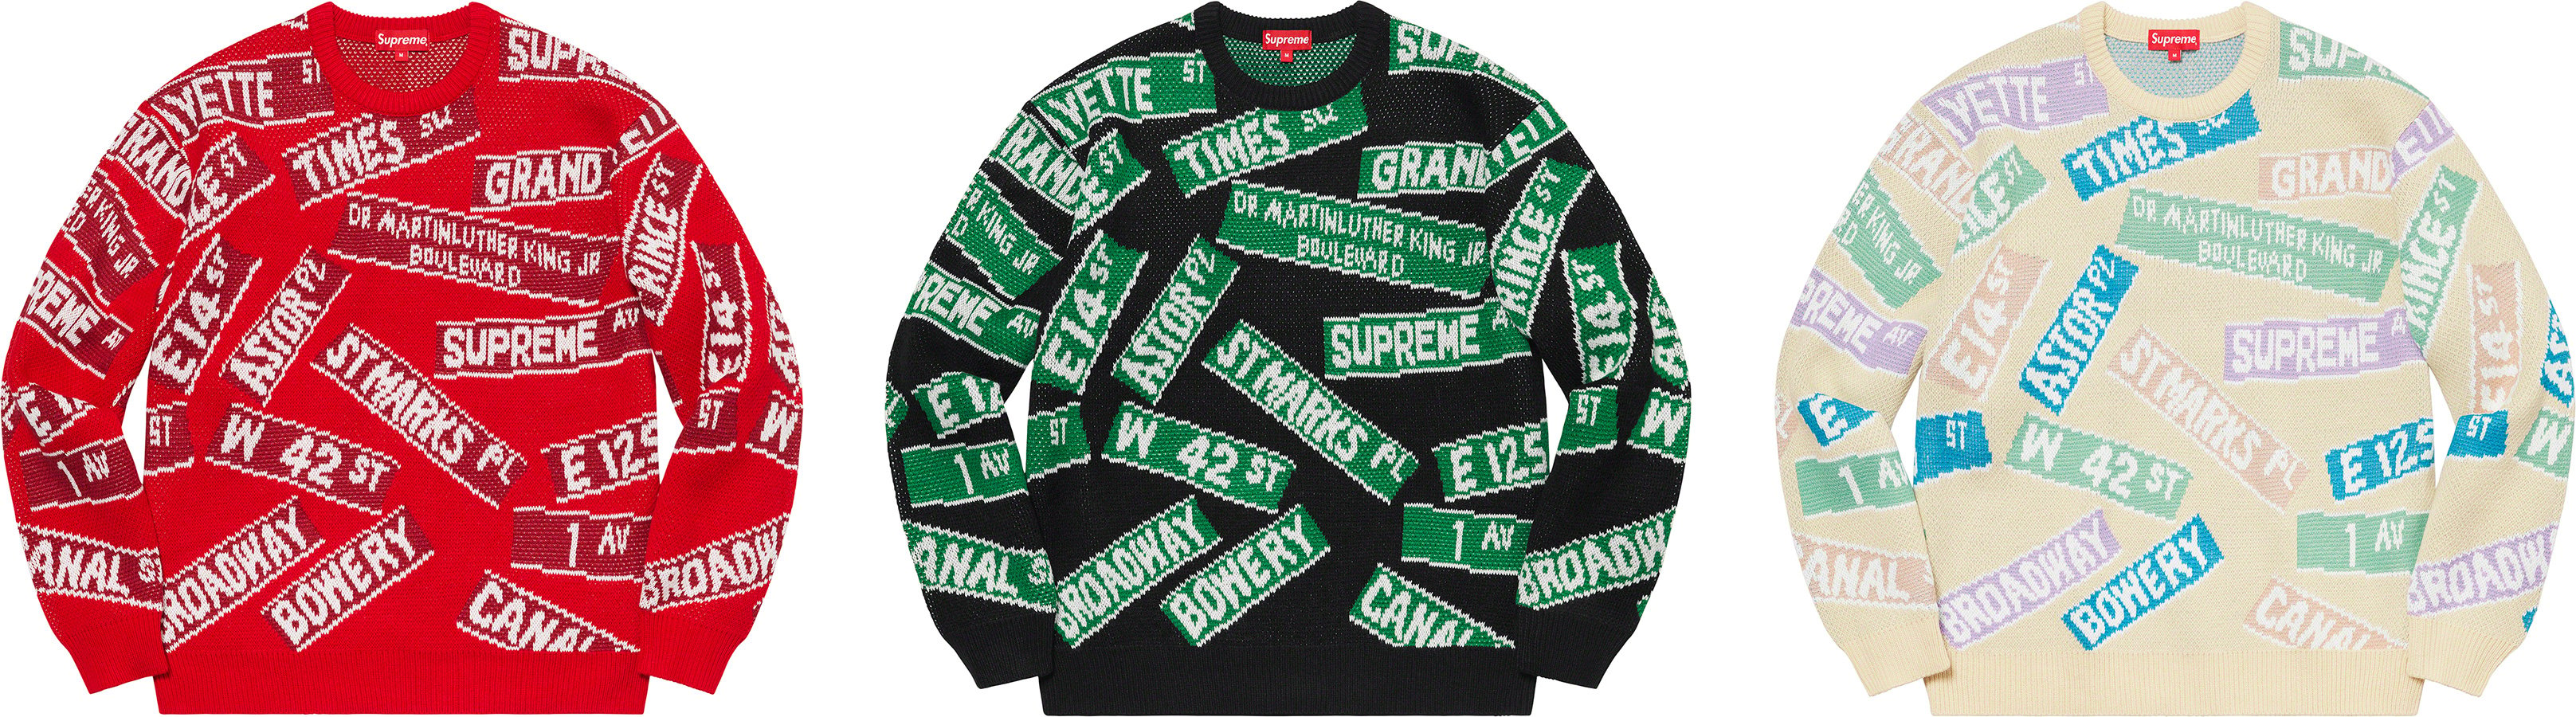 Street Signs Sweater - spring summer 2021 - Supreme